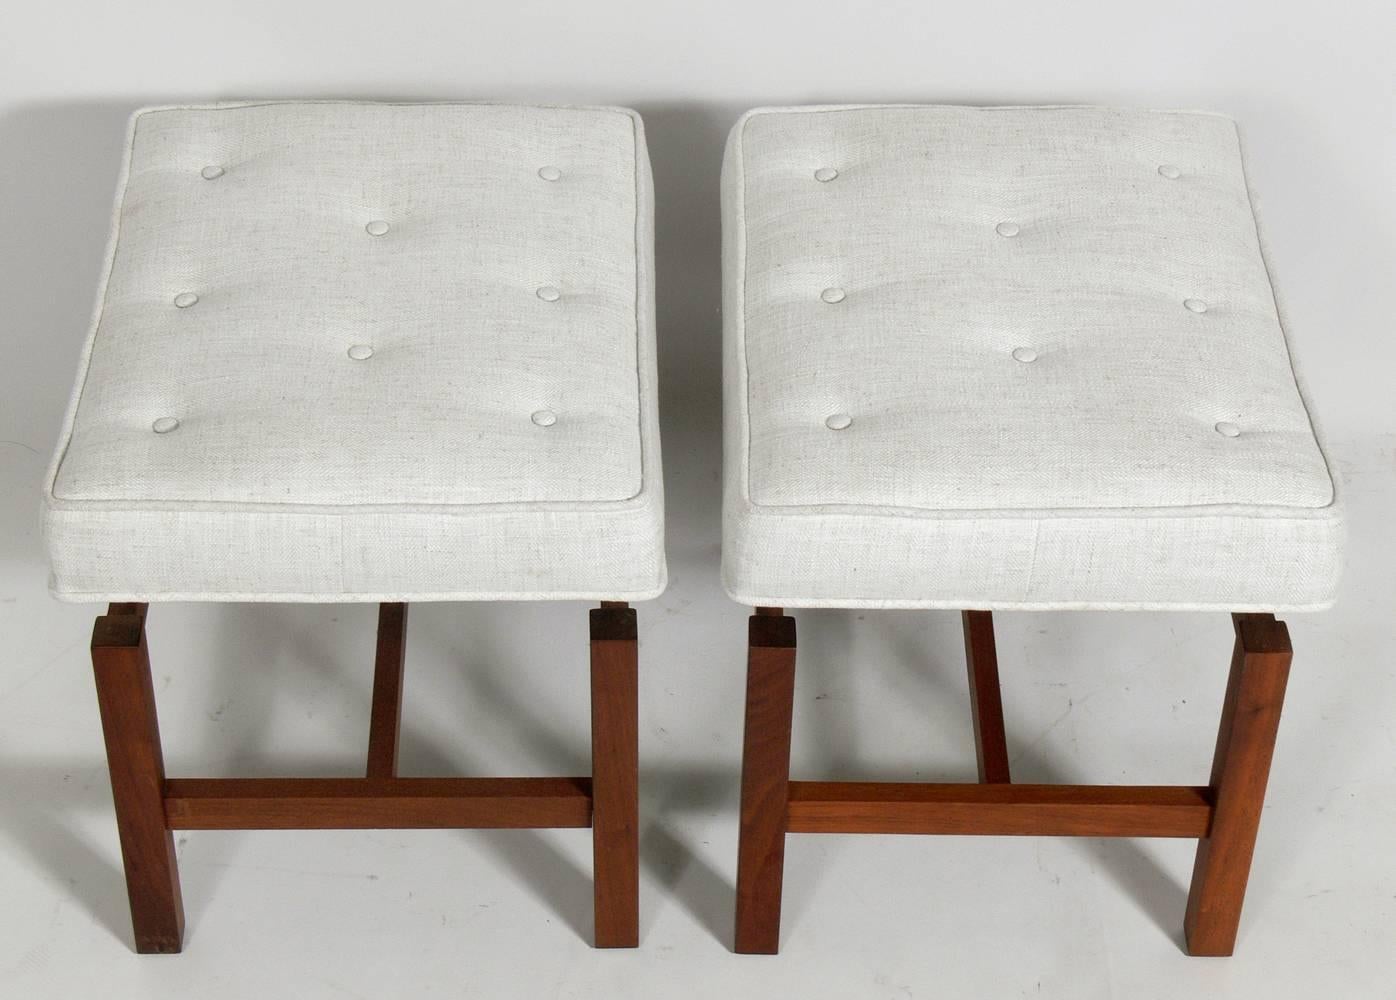 American Pair of Modern Benches or Stools Designed by Jens Risom